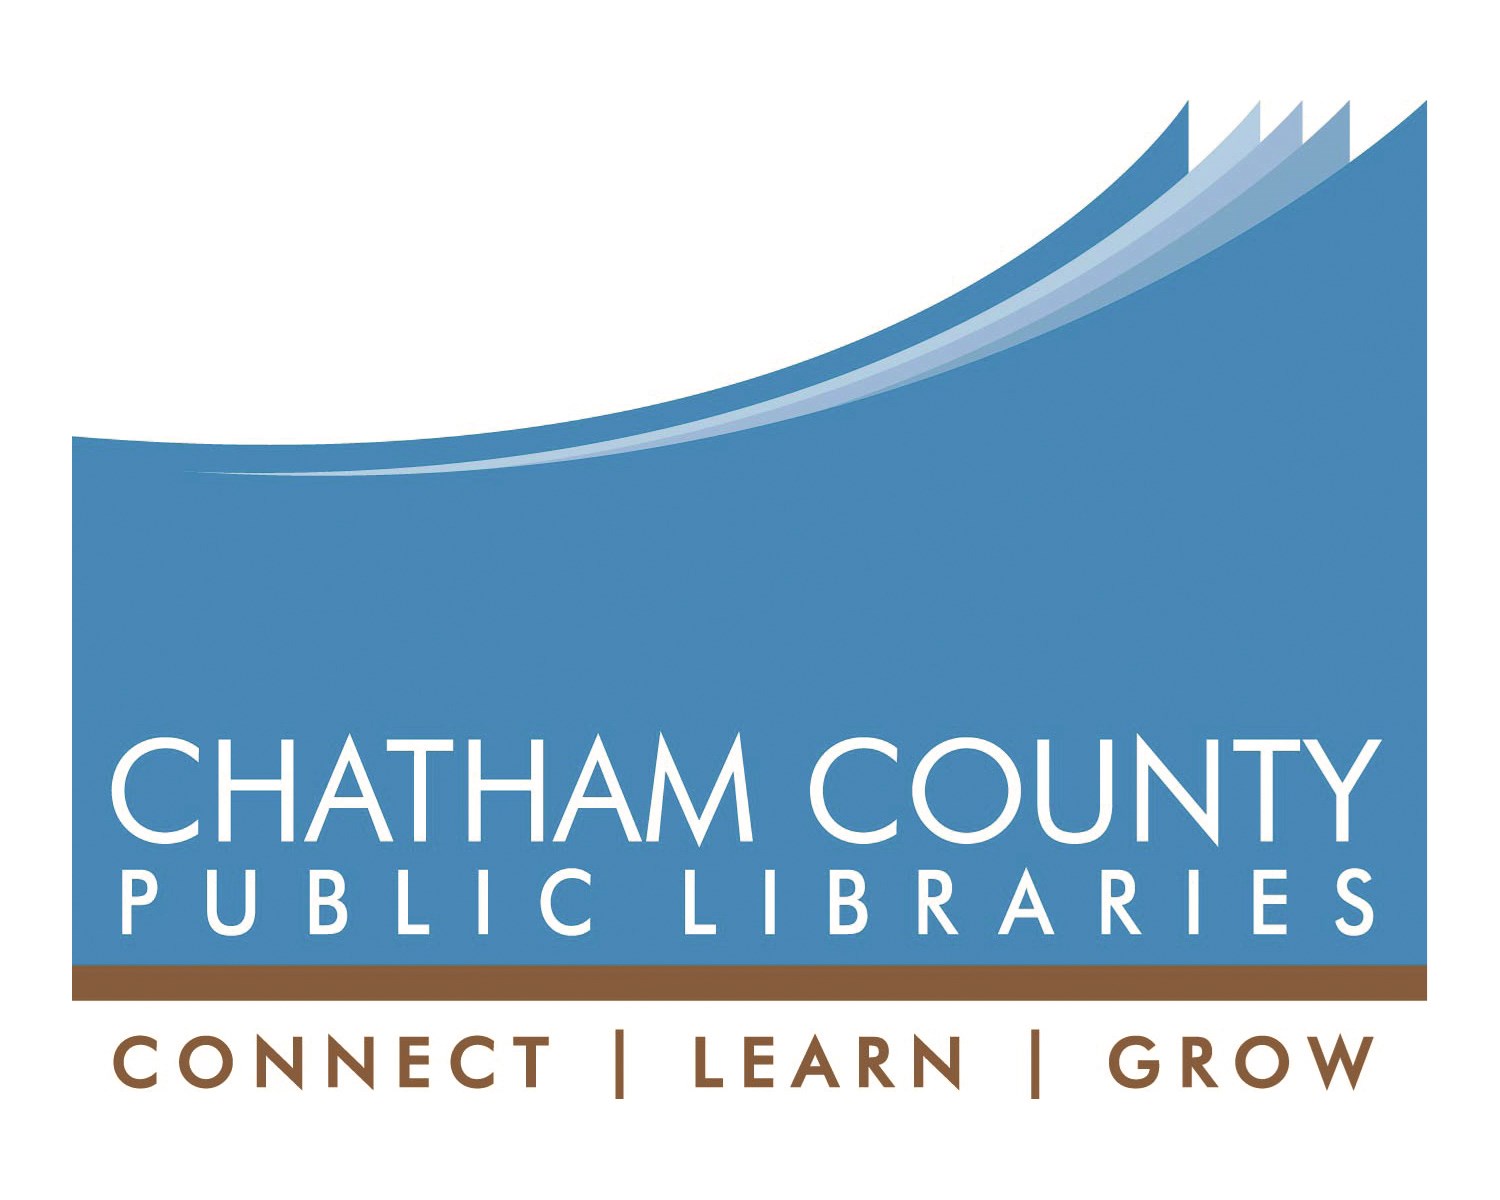 Chatham County Public Libraries